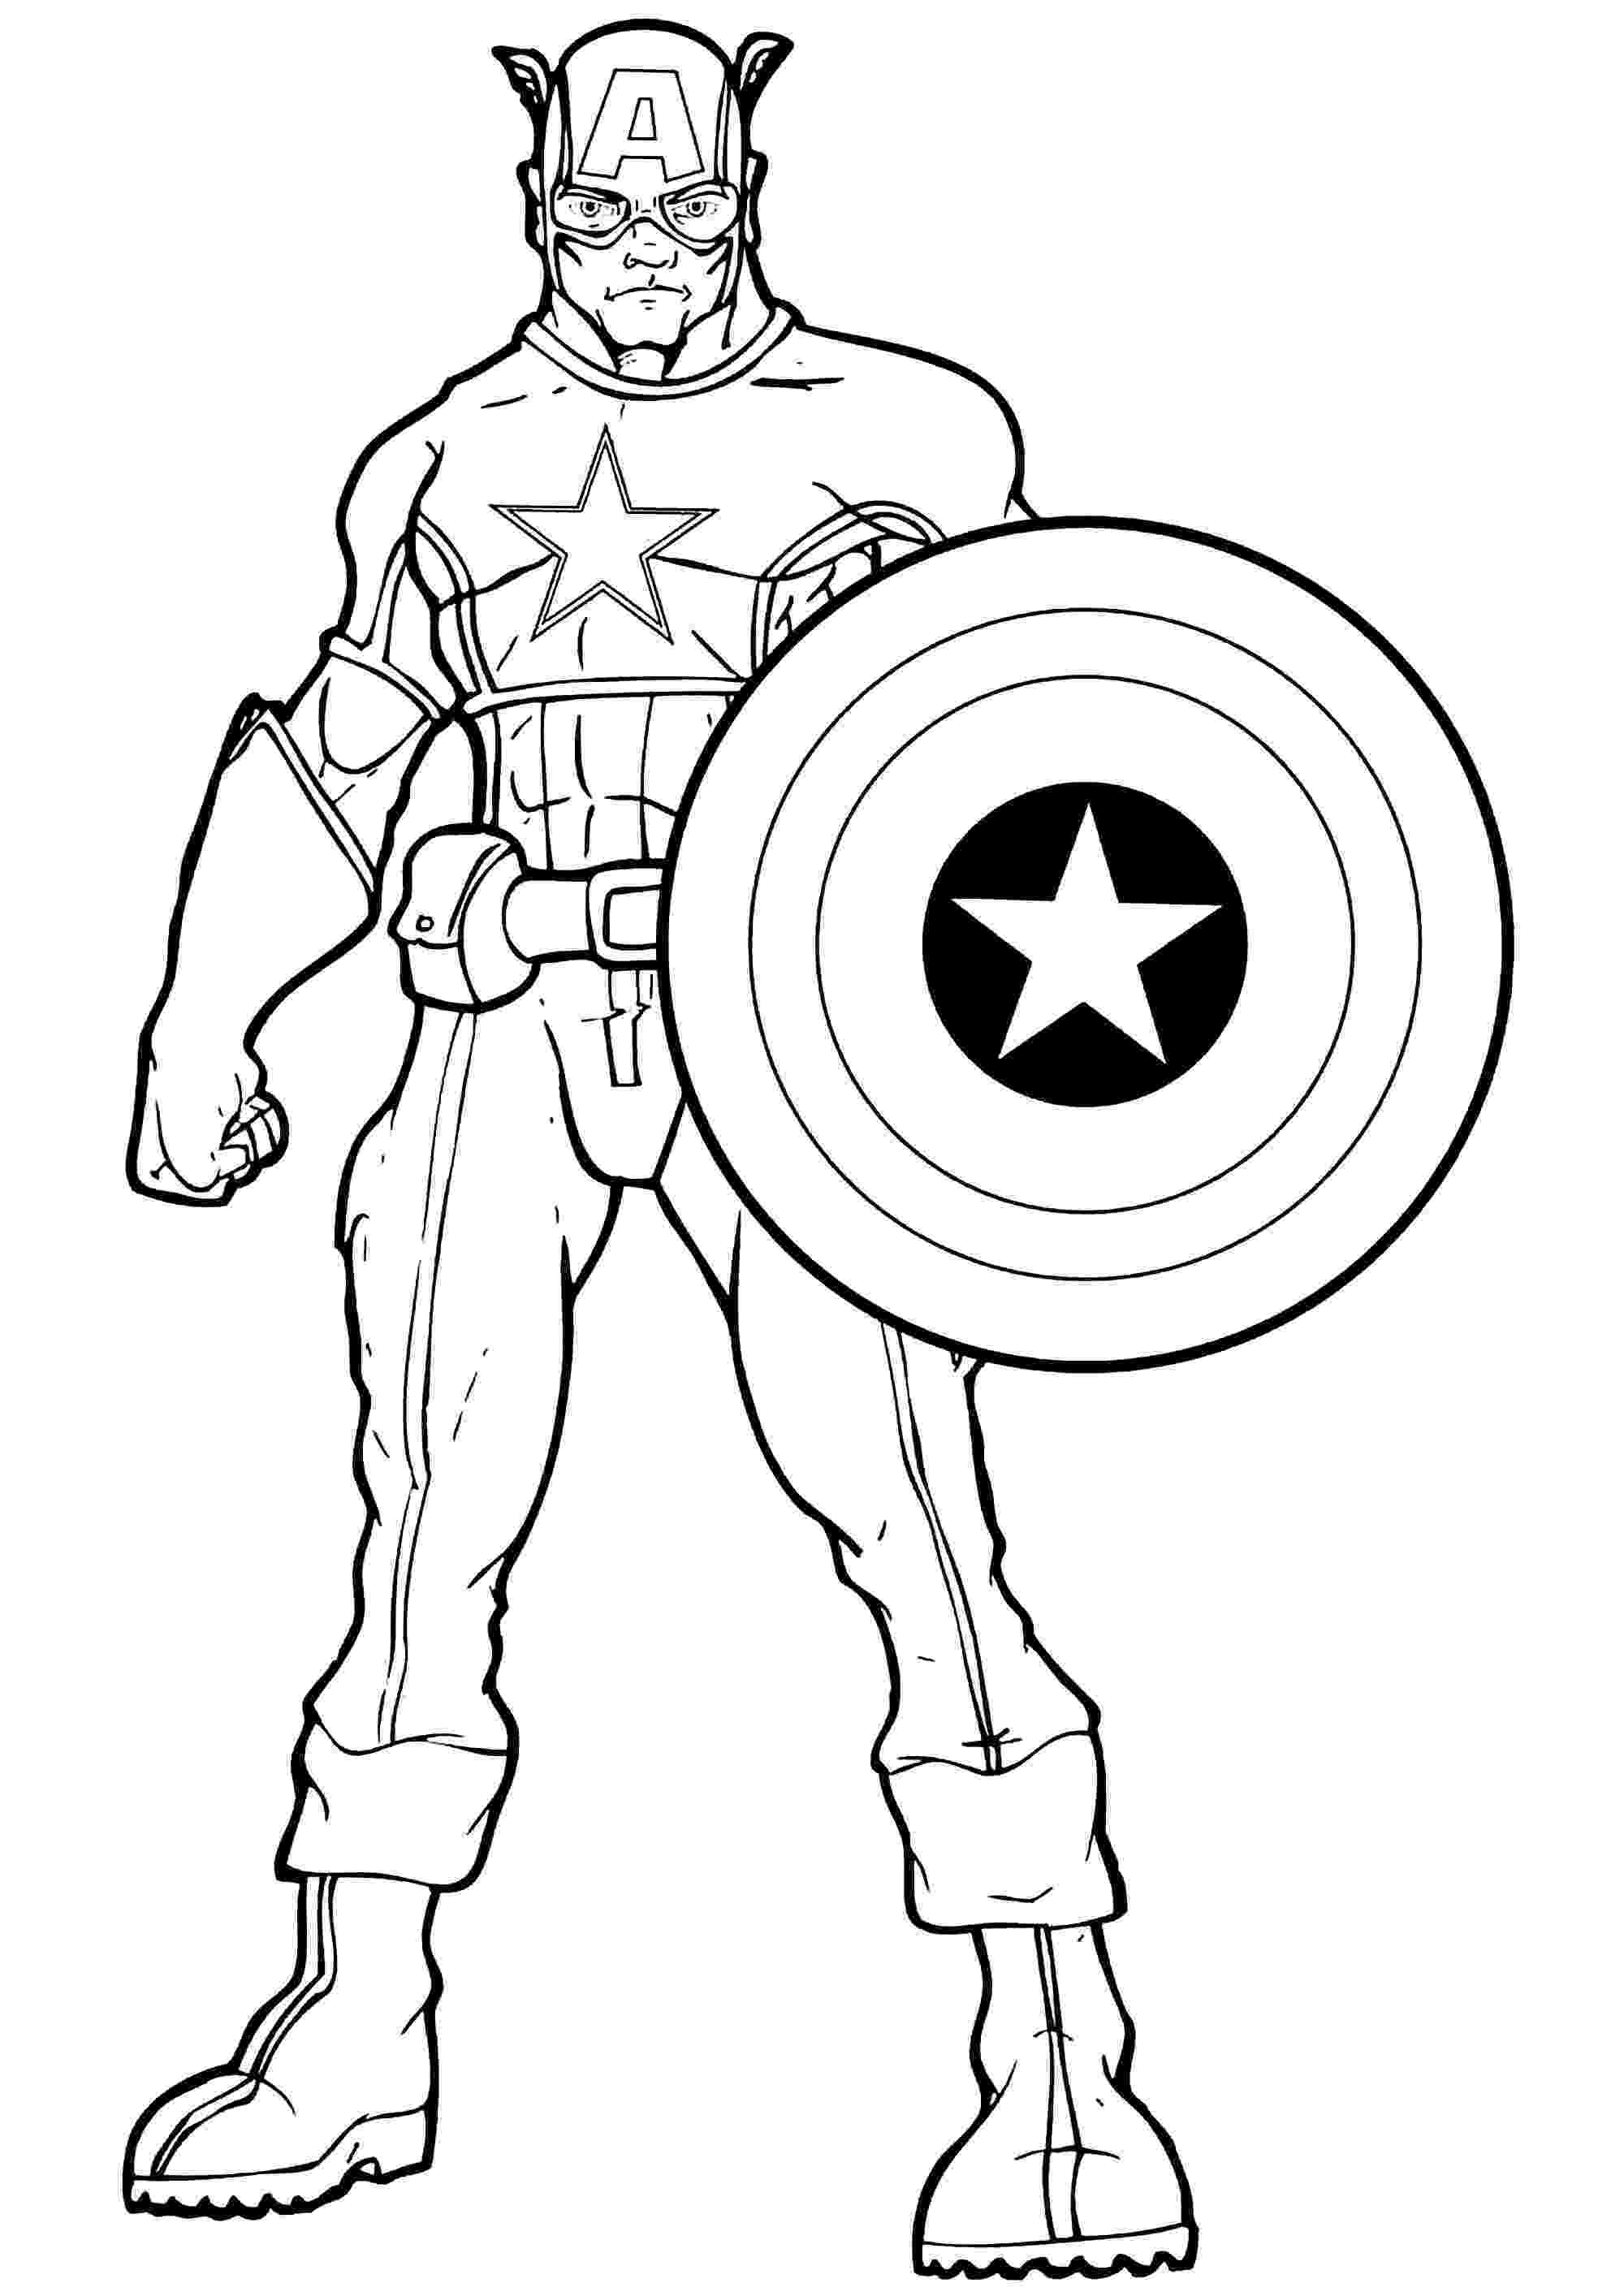 captain america coloring sheet captain america shield coloring pages getcoloringpagescom coloring america sheet captain 